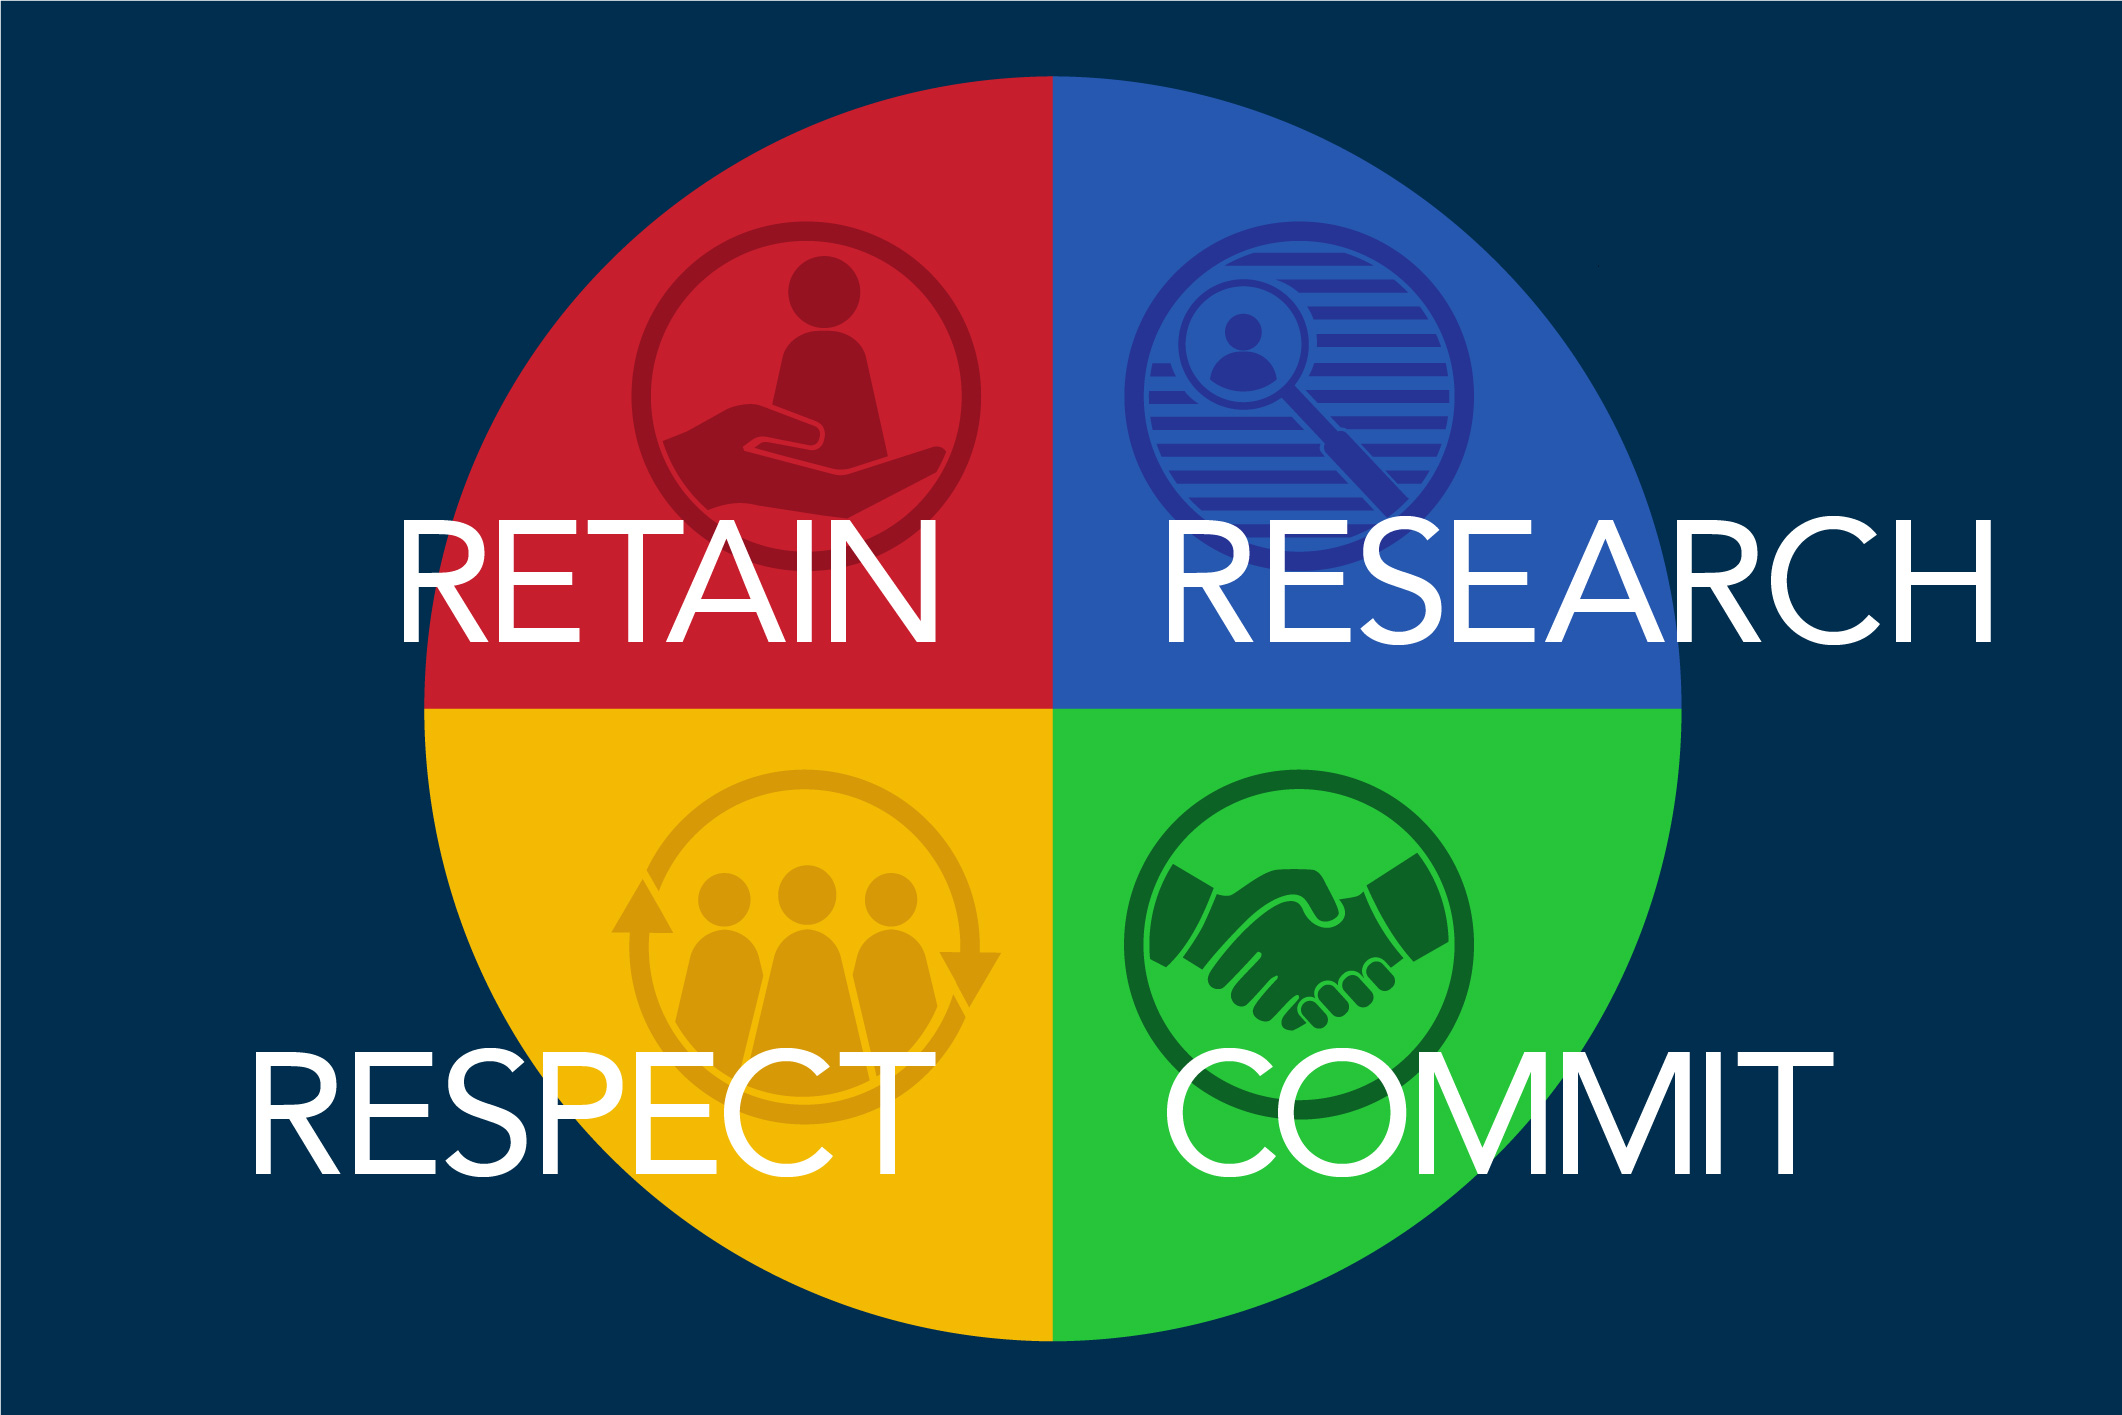 Retain, research, respect, and commit graphic